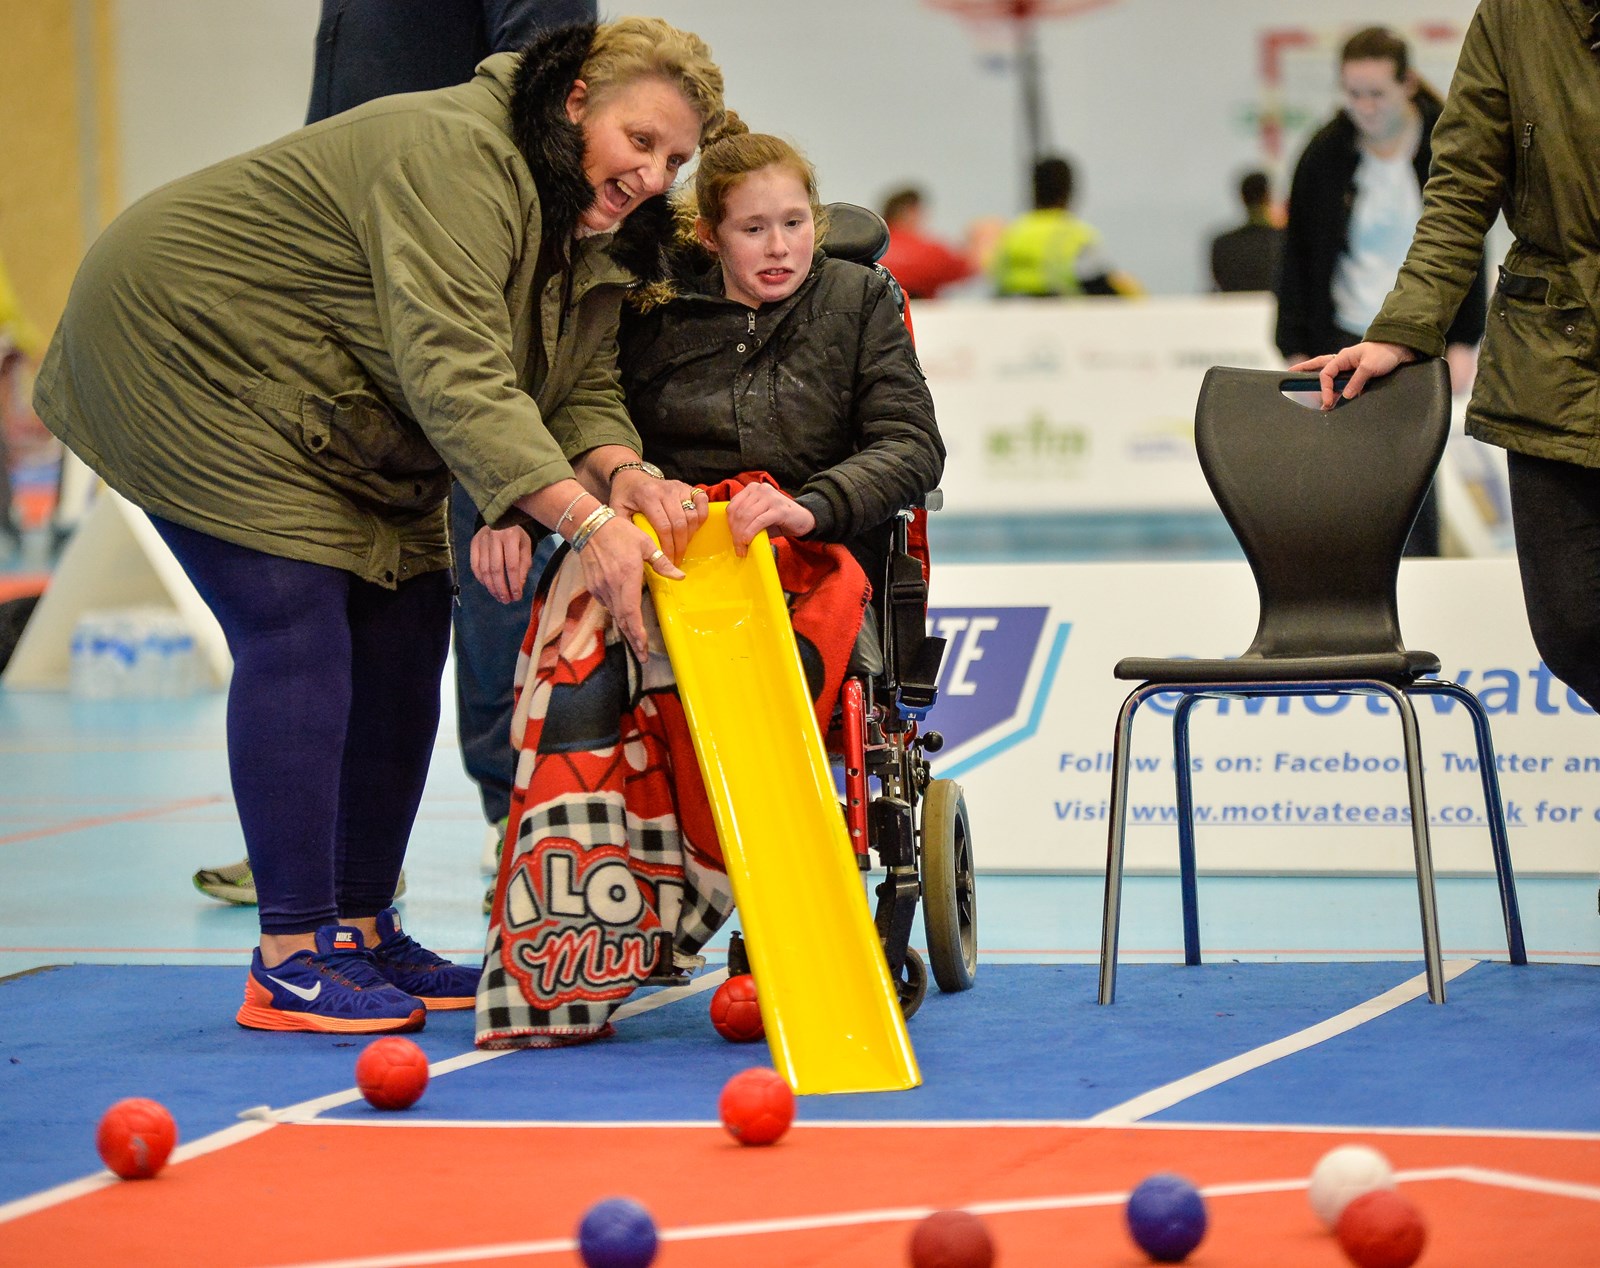 Boccia girl with supporter